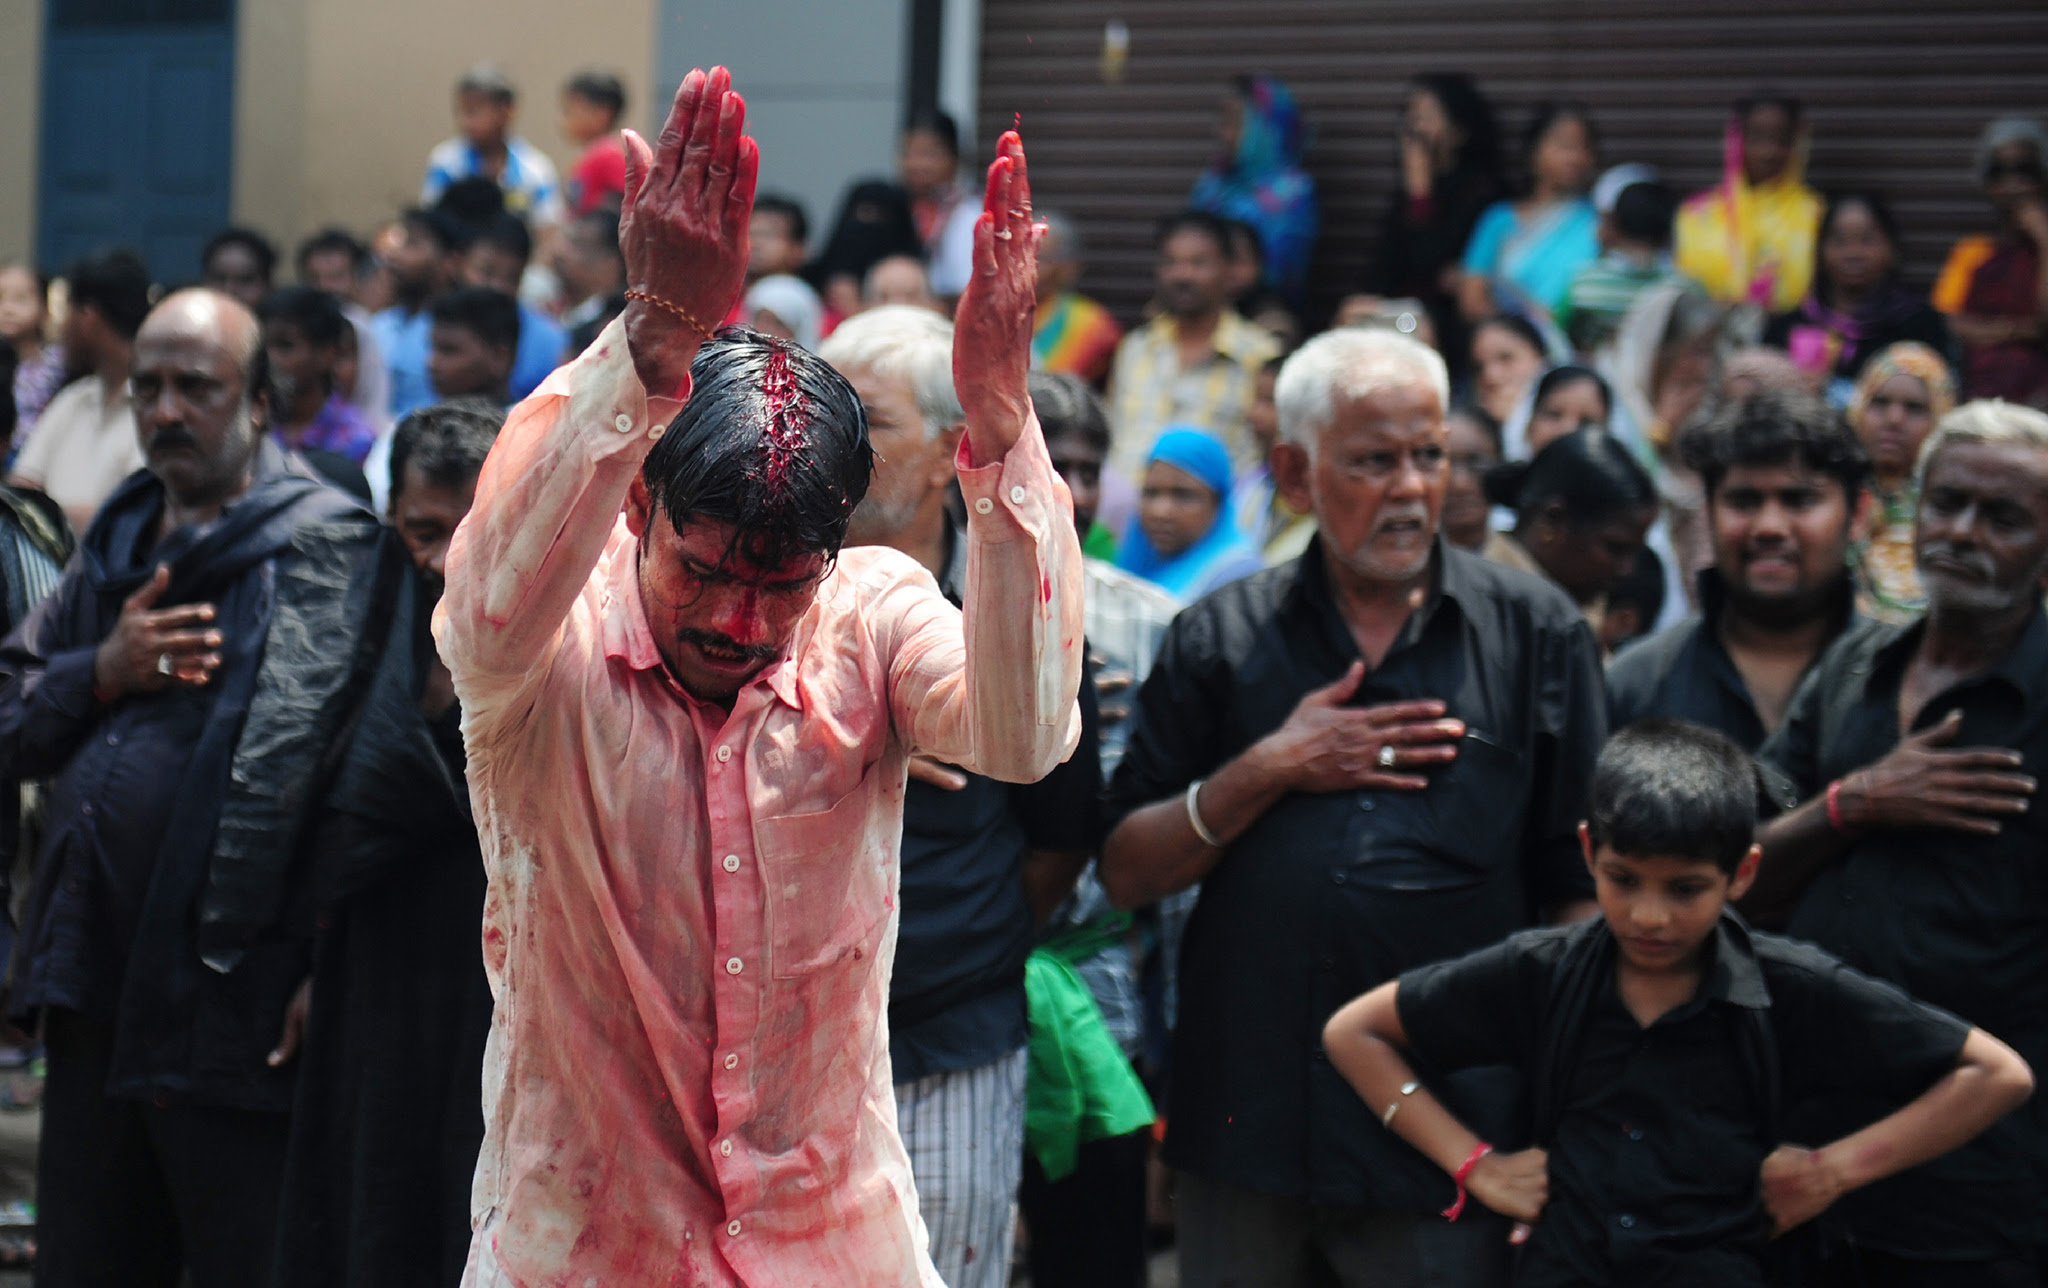 Indian Shia Muslim men flagellate themselves during the mourning procession on the tenth day of Muharram, which marks the day of Ashura, in Chennai on October 12, 2016. Ashura mourns the death of Imam Hussein, a grandson of the Prophet Mohammed, who was killed by armies of the Yazid near Karbala in 680 AD. / AFP PHOTO / ARUN SANKARARUN SANKAR/AFP/Getty Images